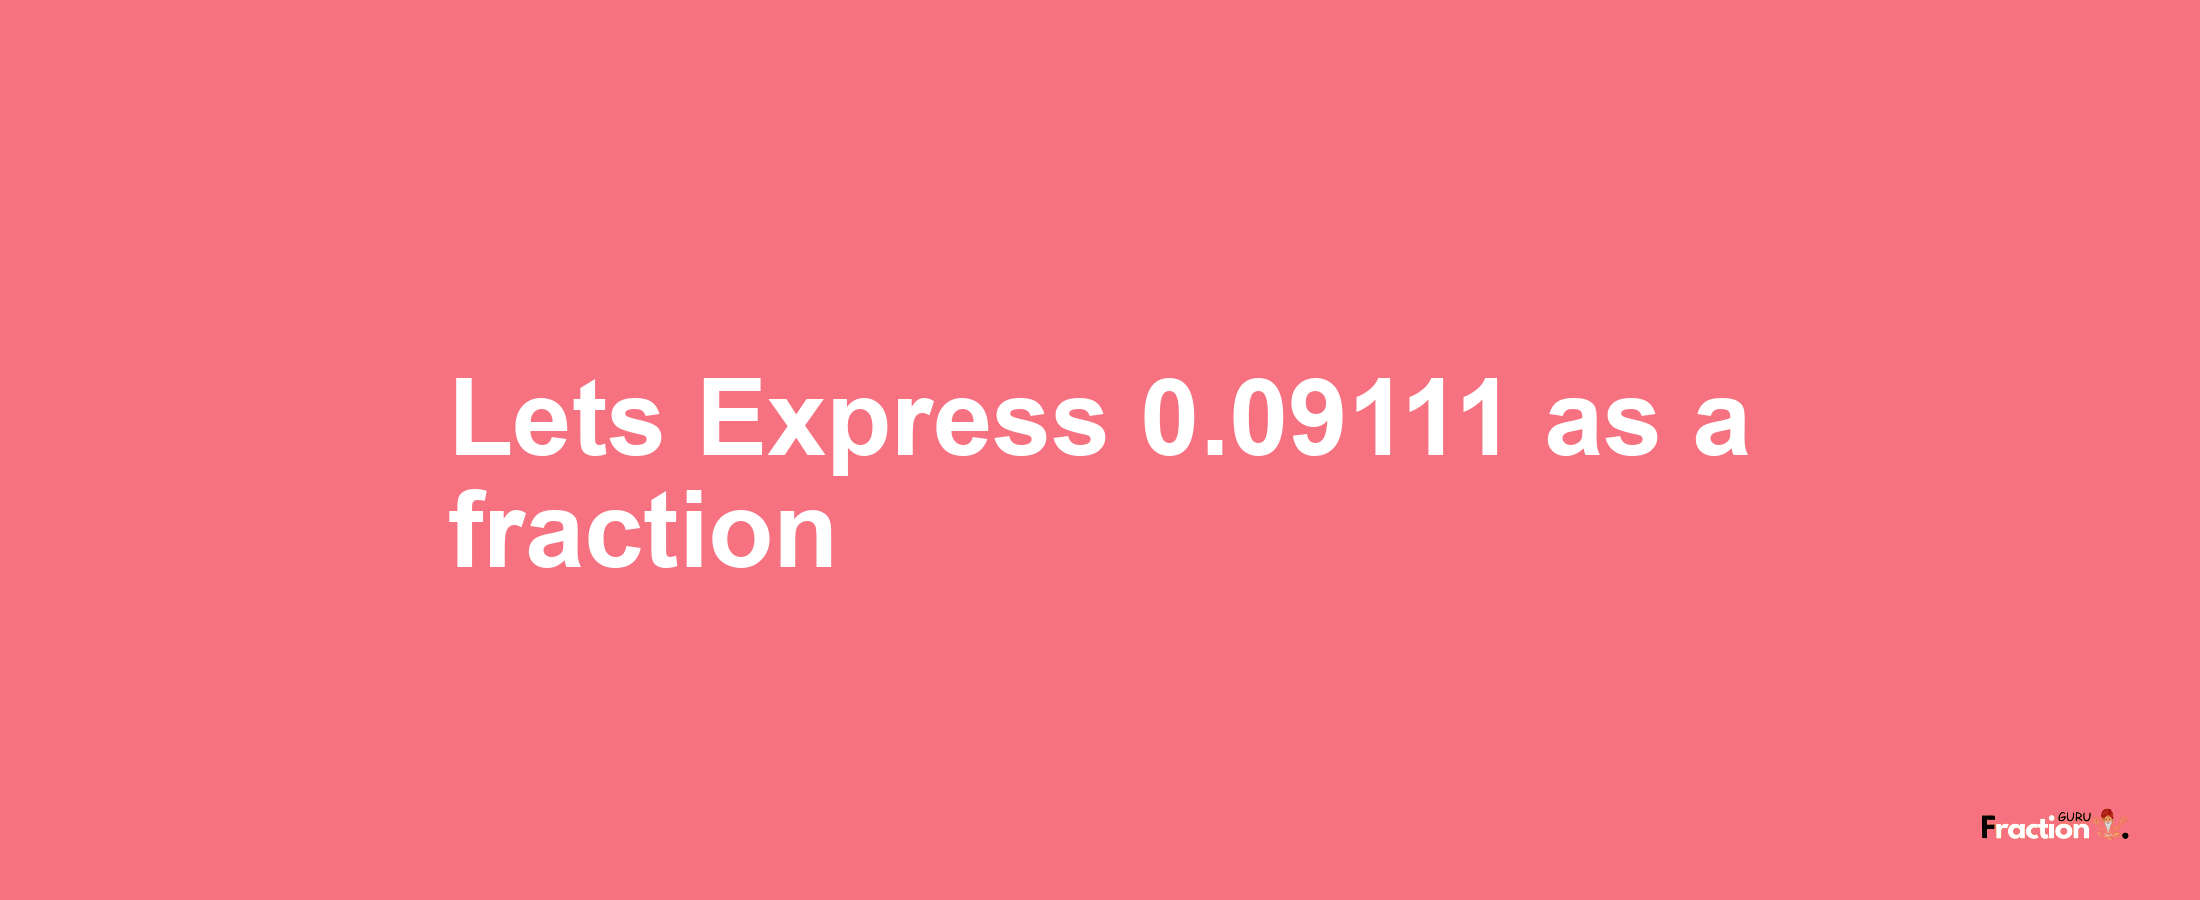 Lets Express 0.09111 as afraction